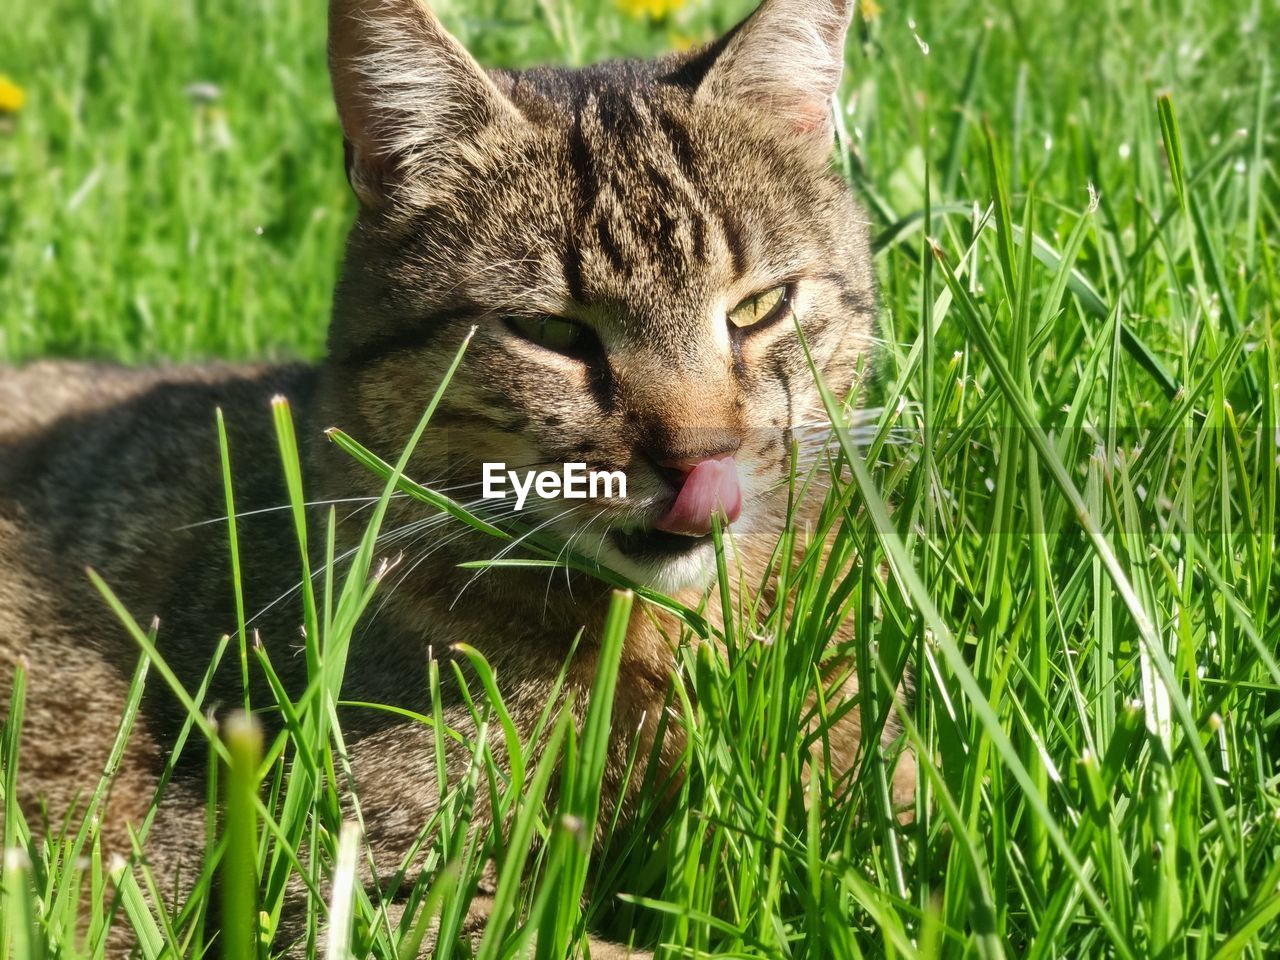 CLOSE-UP OF A CAT ON GRASS